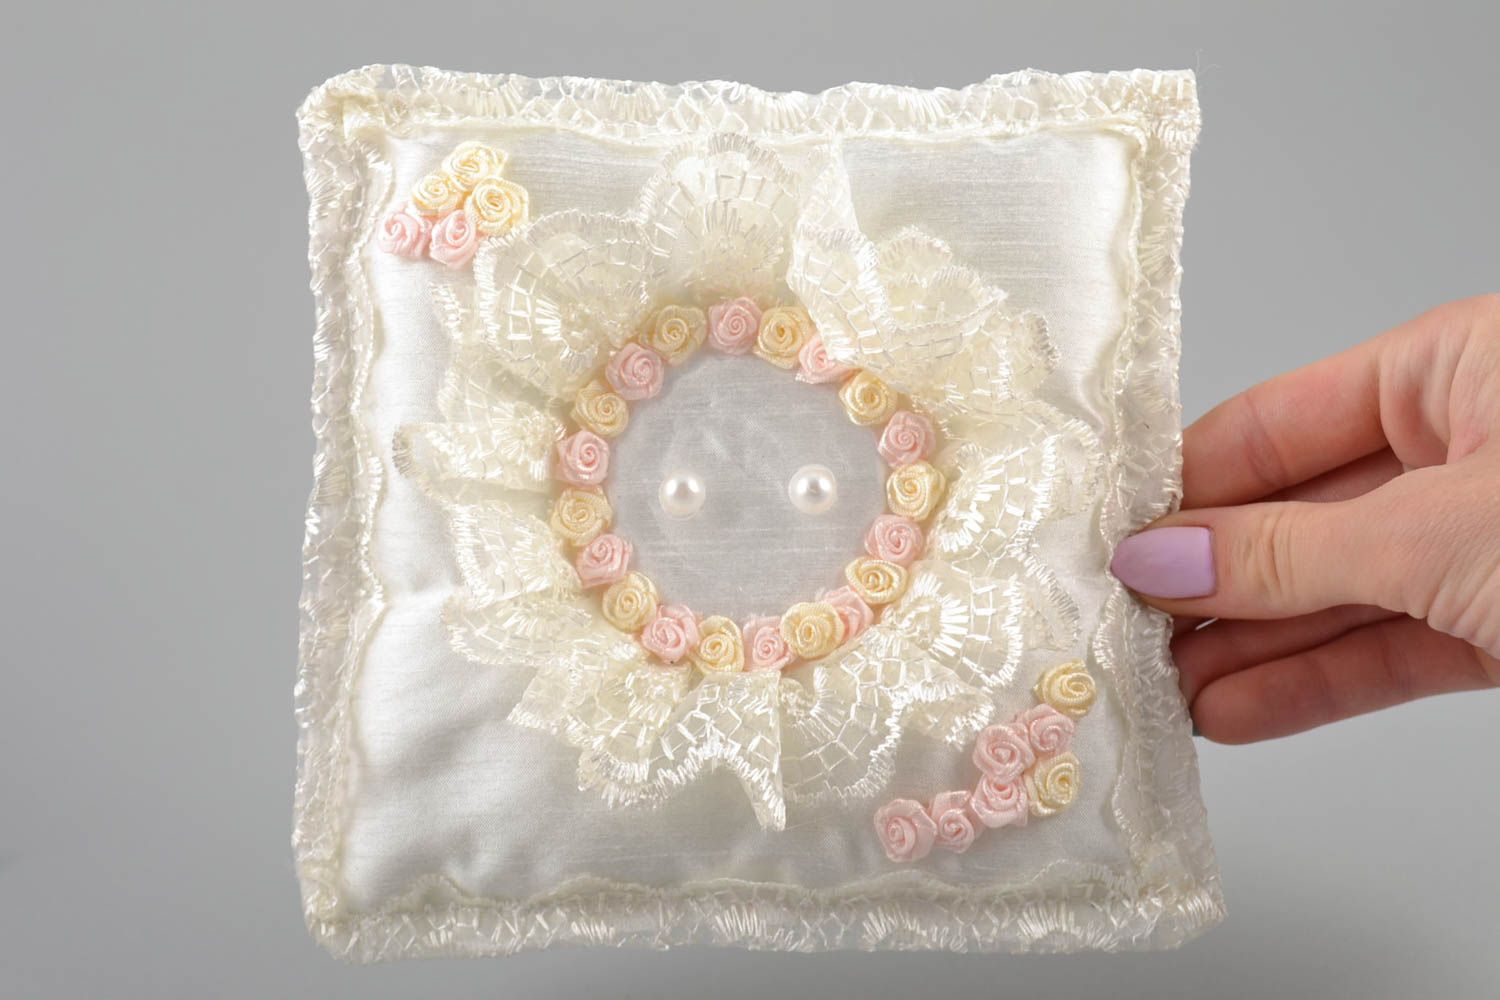 Handmade gentle white wedding bearer pillow decorated with flowers photo 5